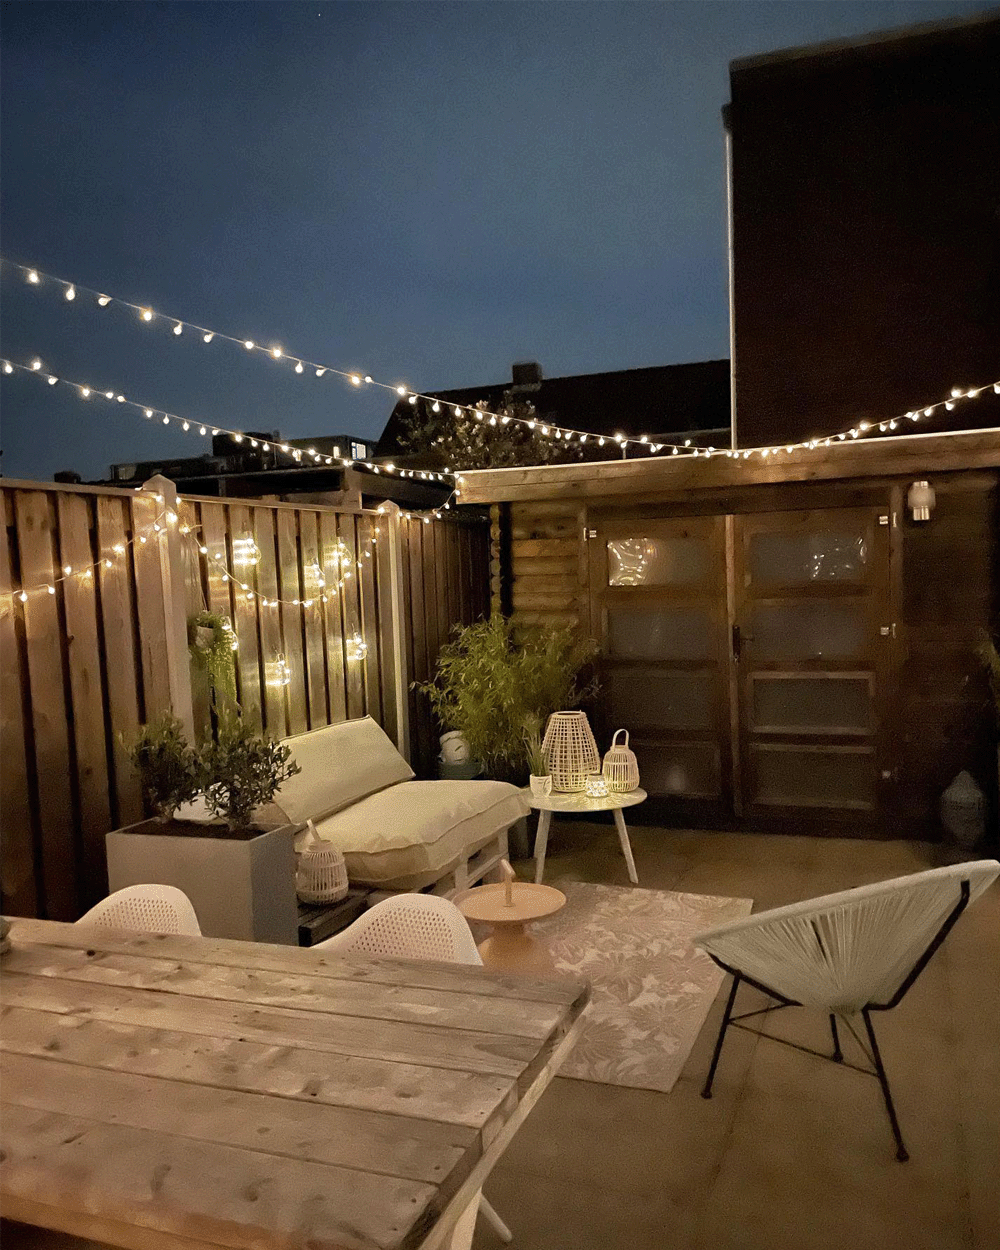 Backyard seating area with lots of light sources